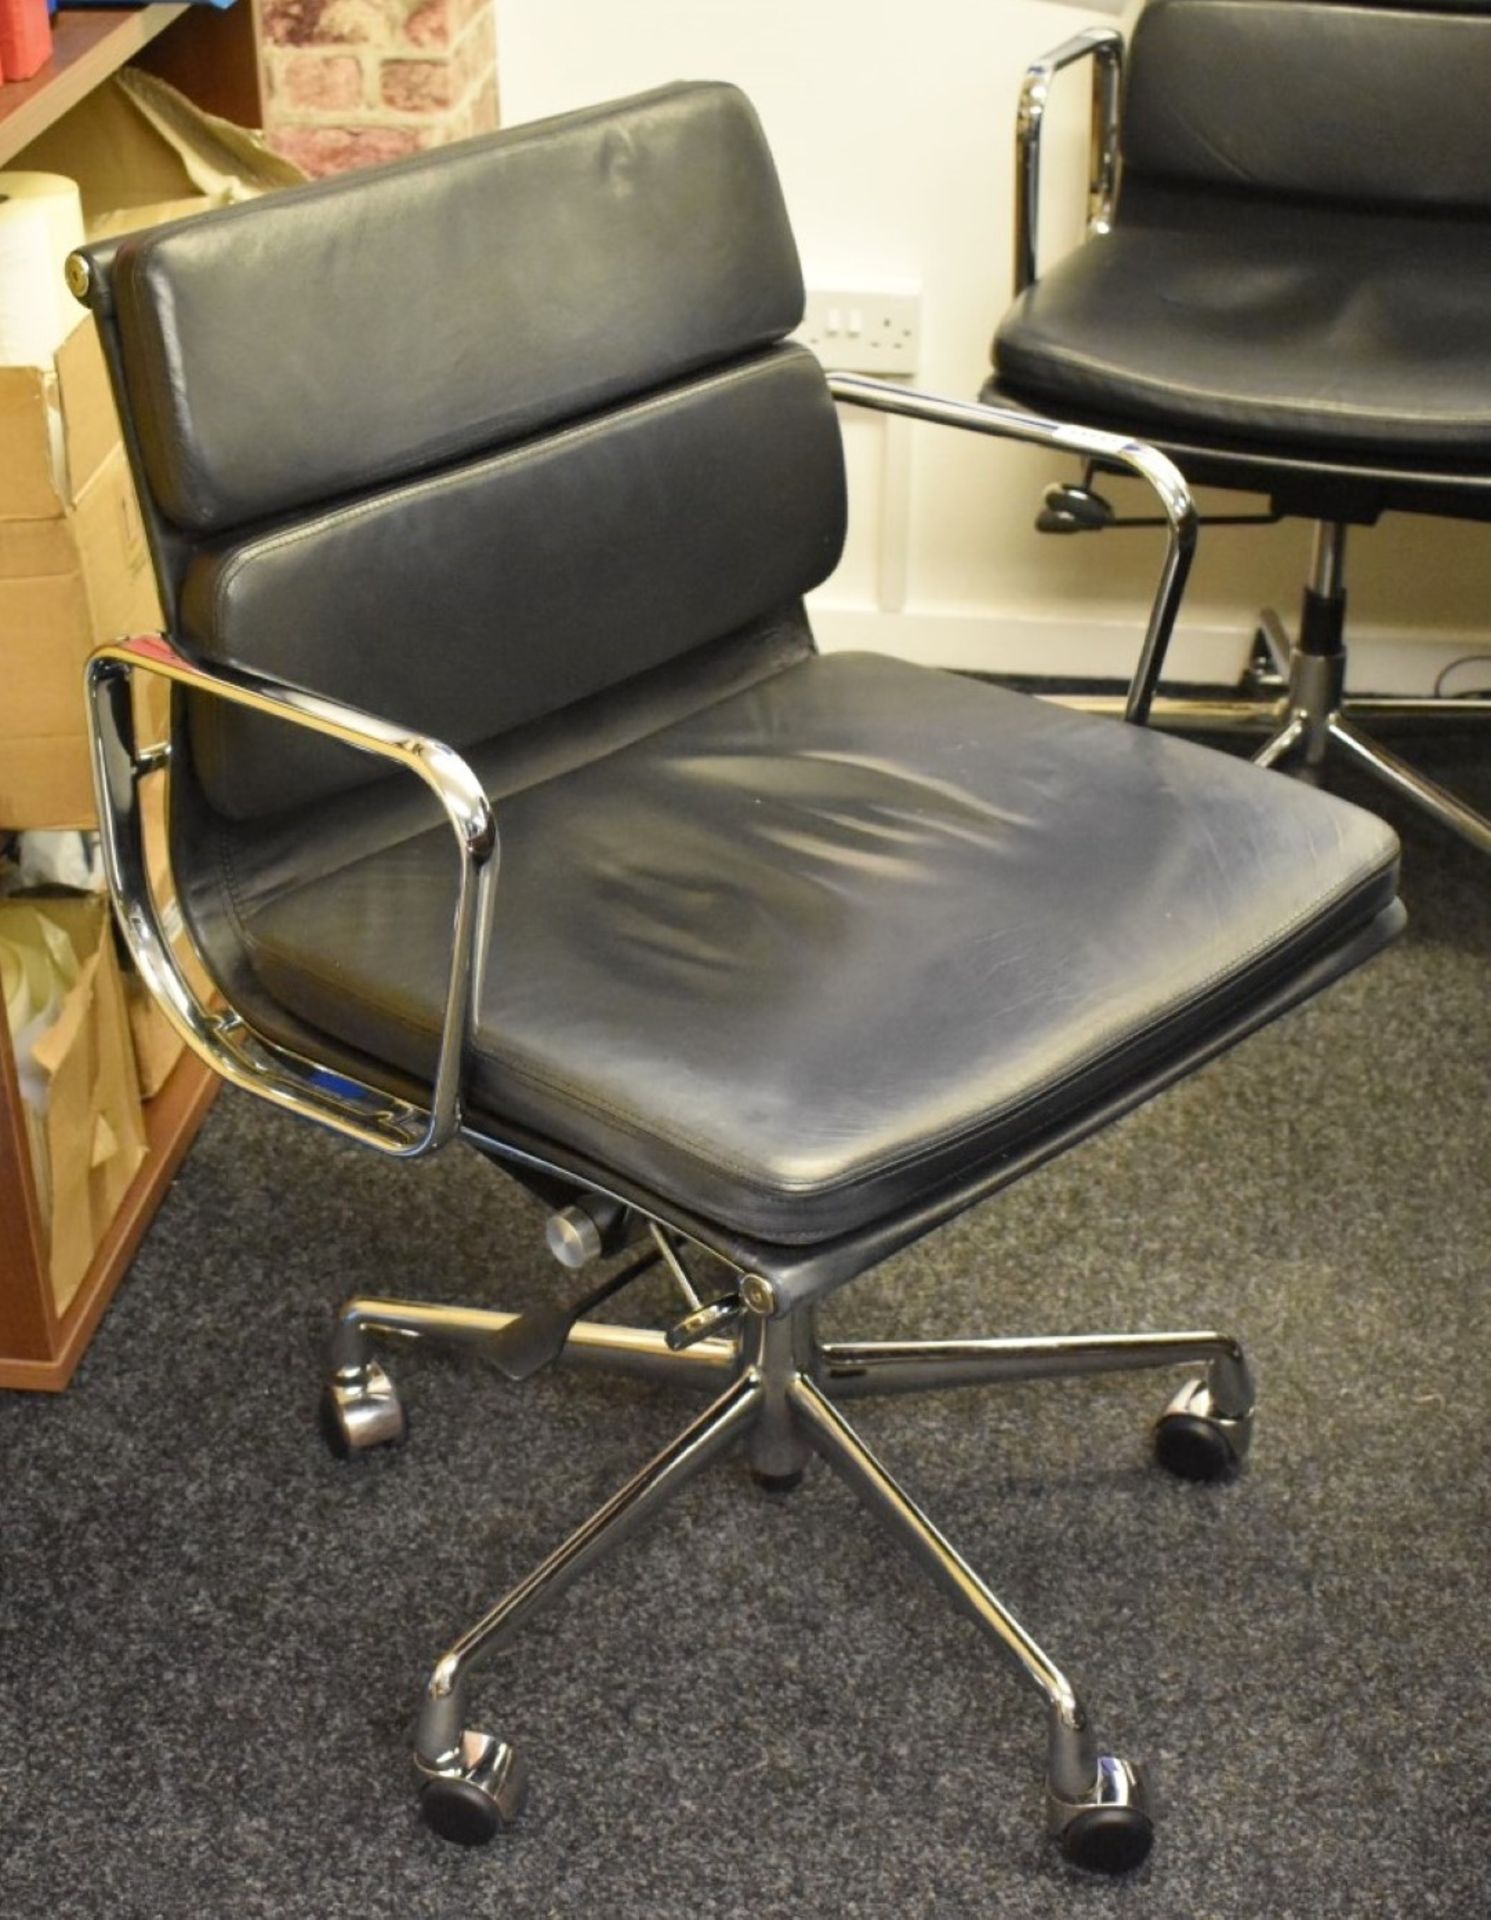 1 x Eames Inspired Office Chair - Swivel Office Chair Upholstered in Black Leather - Image 2 of 6